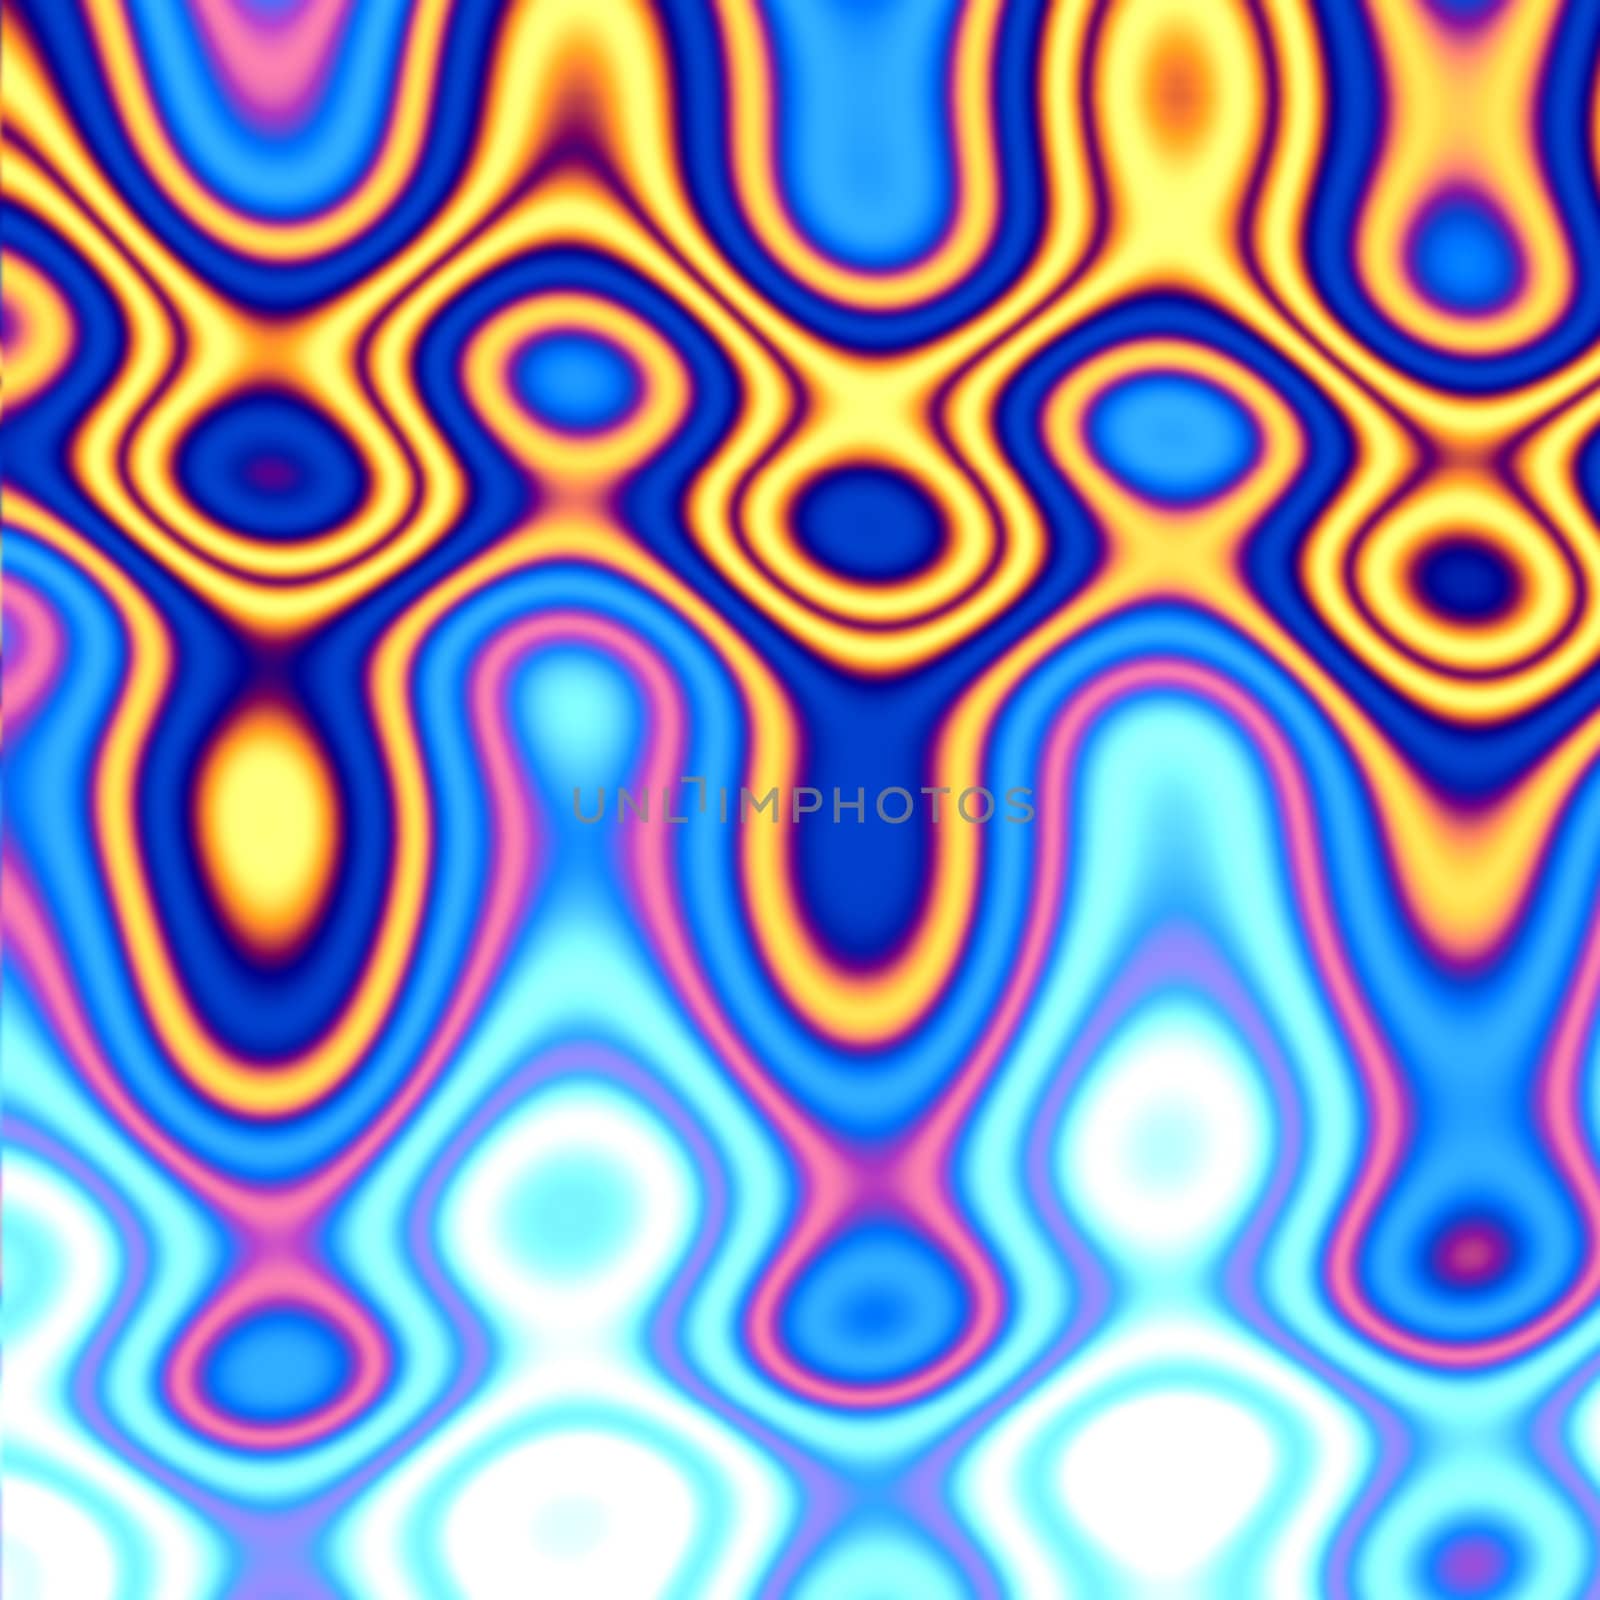 blue and yellow blobs pattern - also looks like abstract blue flames